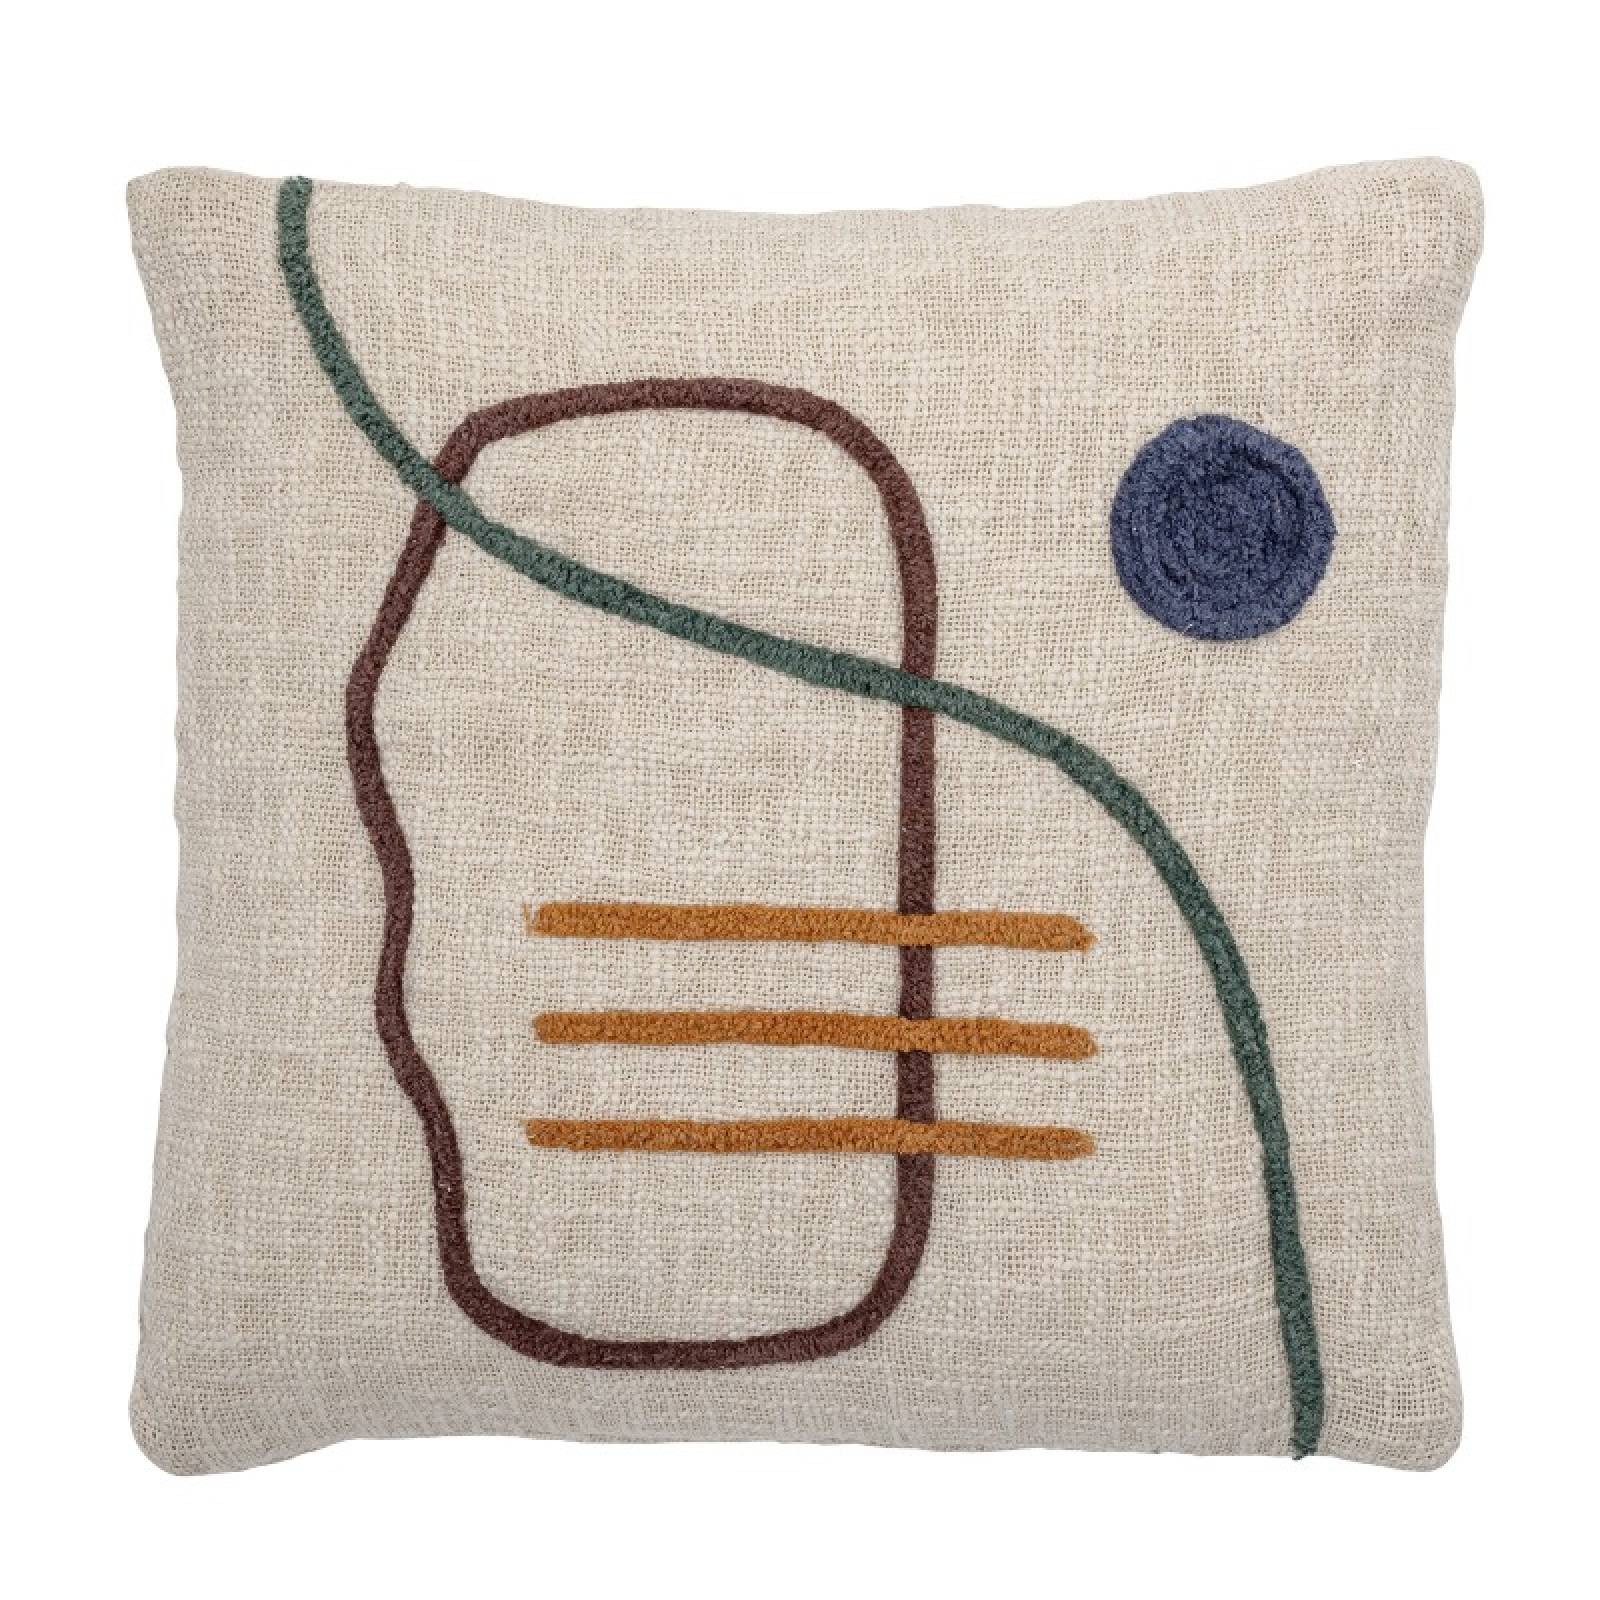 Square Cushion With Abstract Embroidered Design 45 x 45cm